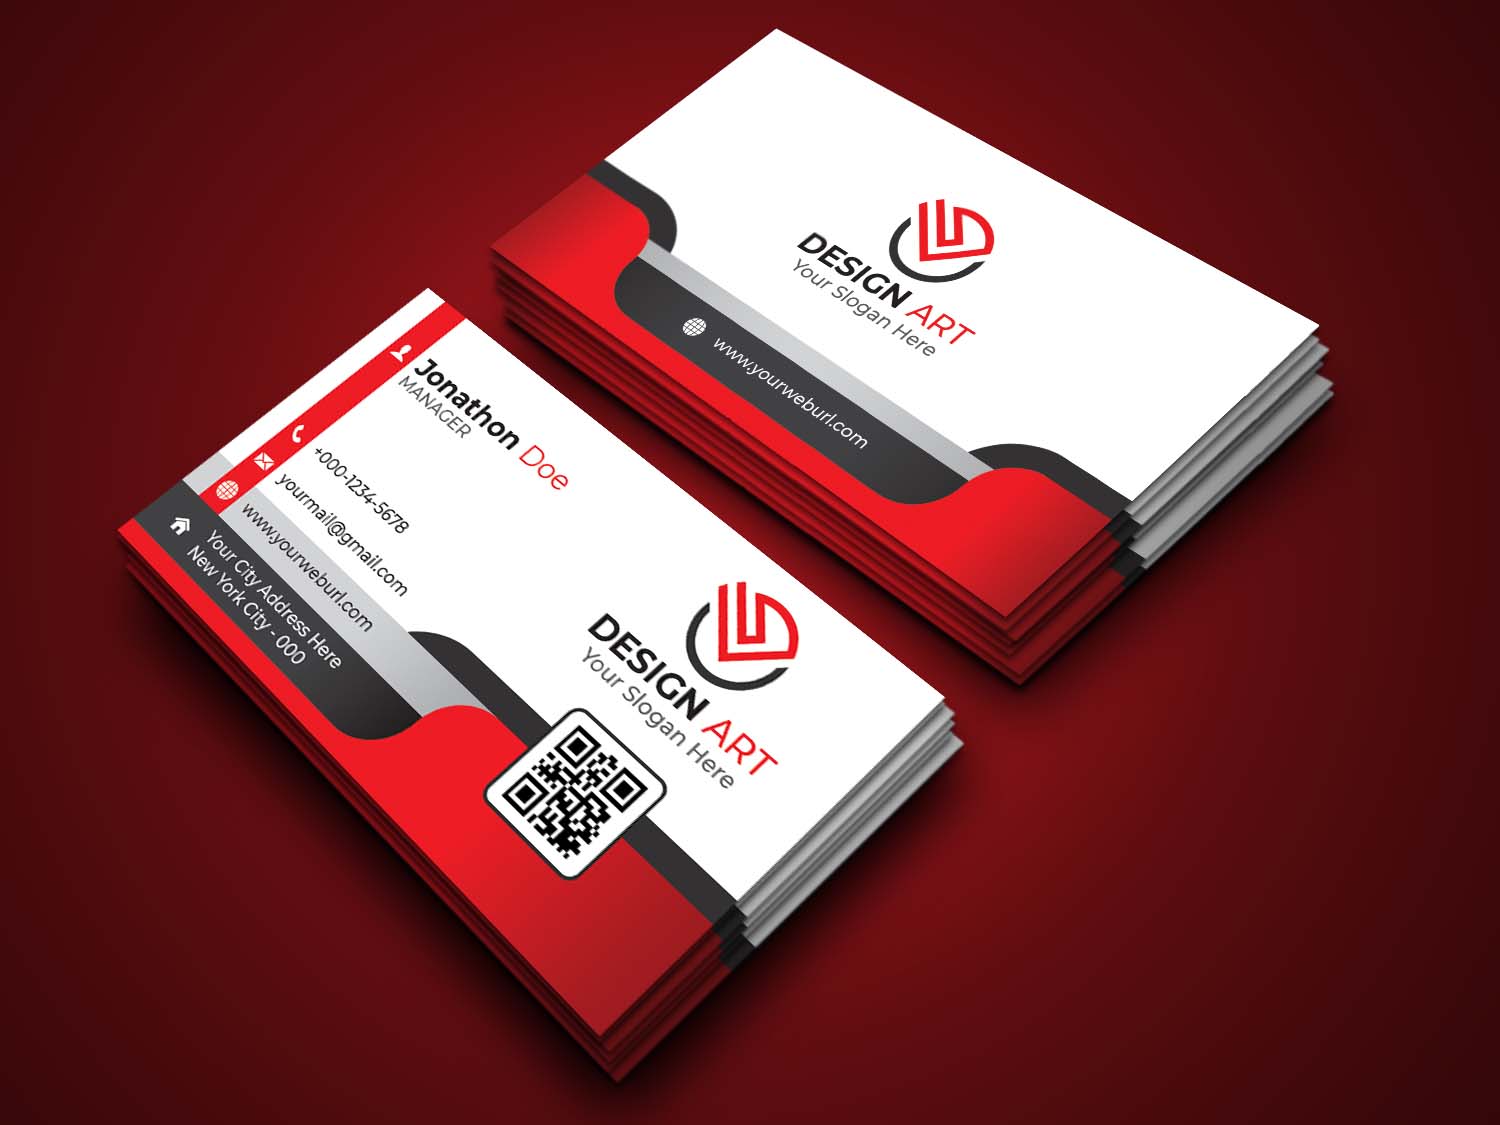 Two red and white business cards on a red background.